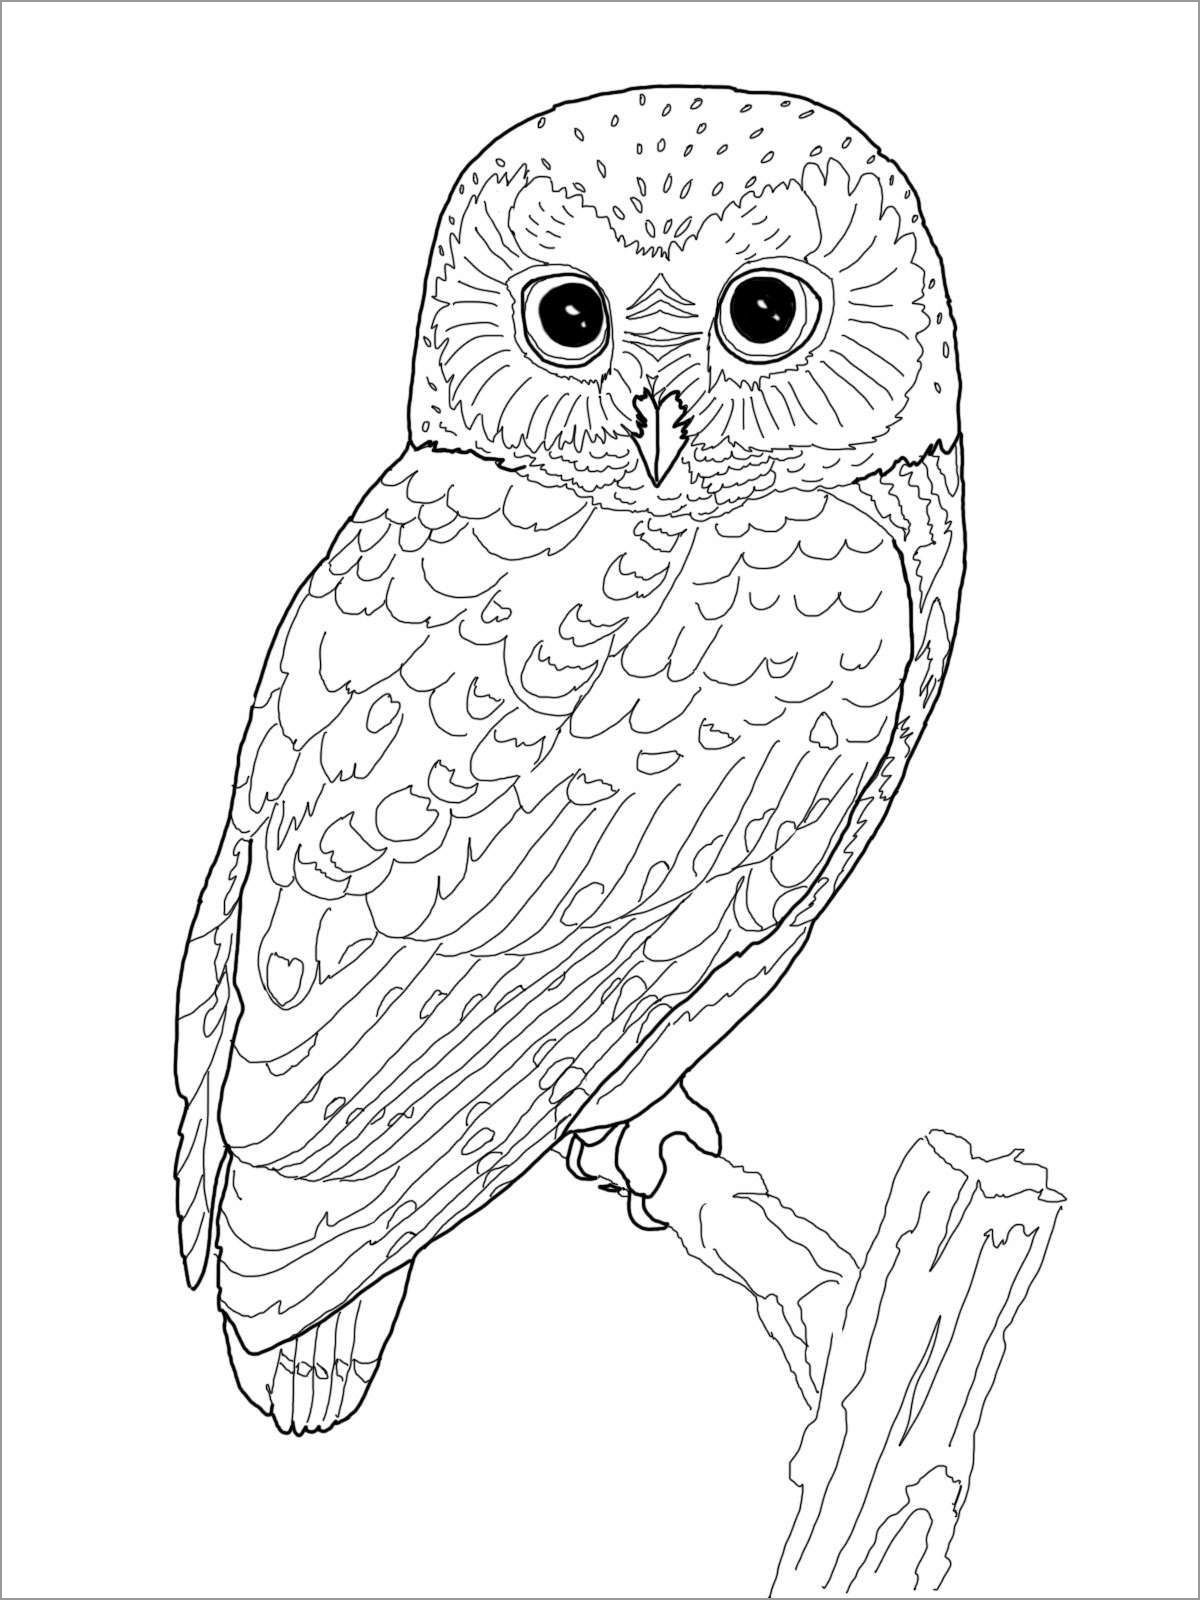 Owl Coloring Page for Adults   ColoringBay